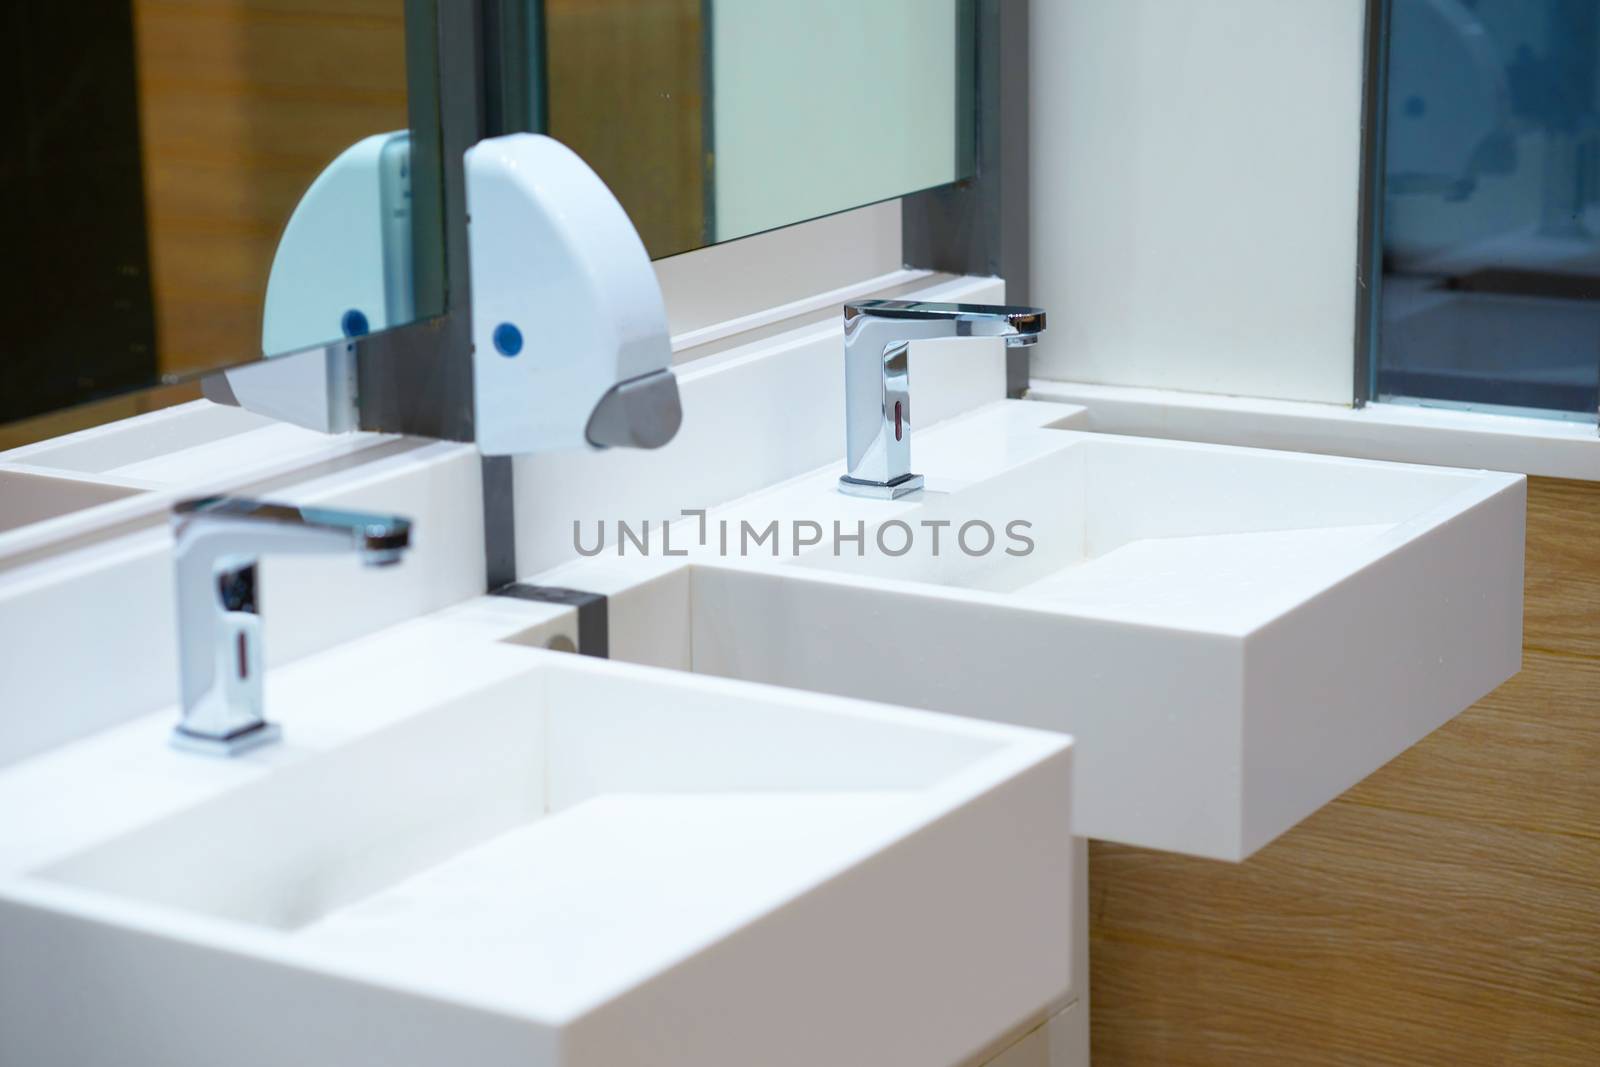 White ceramic sink and water tap with soap dispenser in bath room or toilet